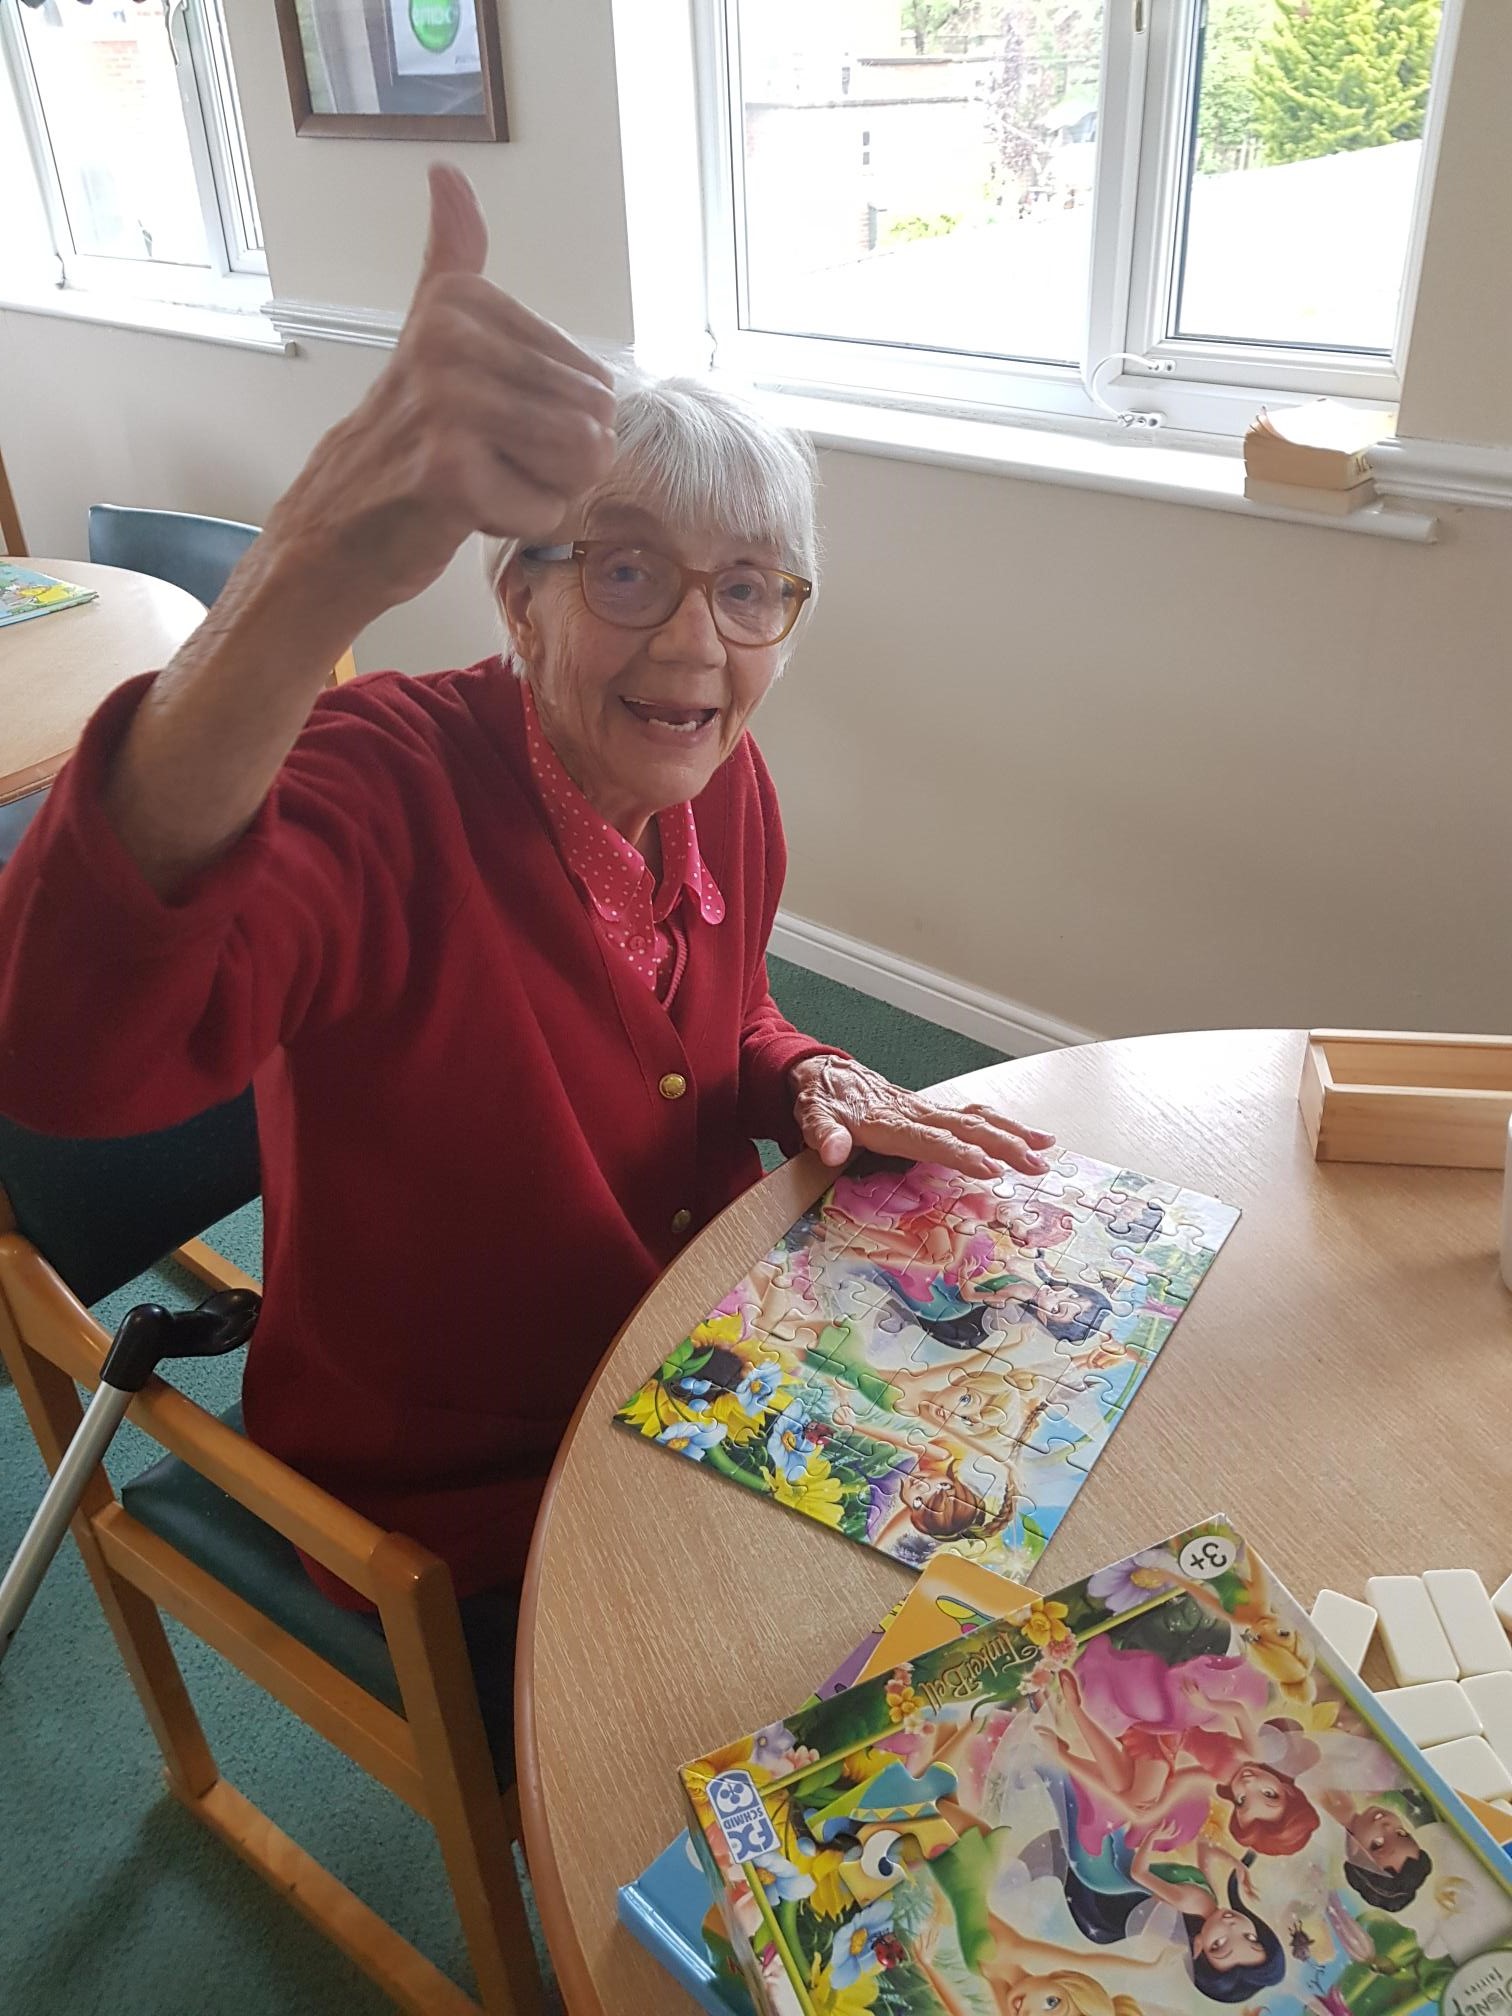 Activities at Four Seasons Care Centre: Key Healthcare is dedicated to caring for elderly residents in safe. We have multiple dementia care homes including our care home middlesbrough, our care home St. Helen and care home saltburn. We excel in monitoring and improving care levels.